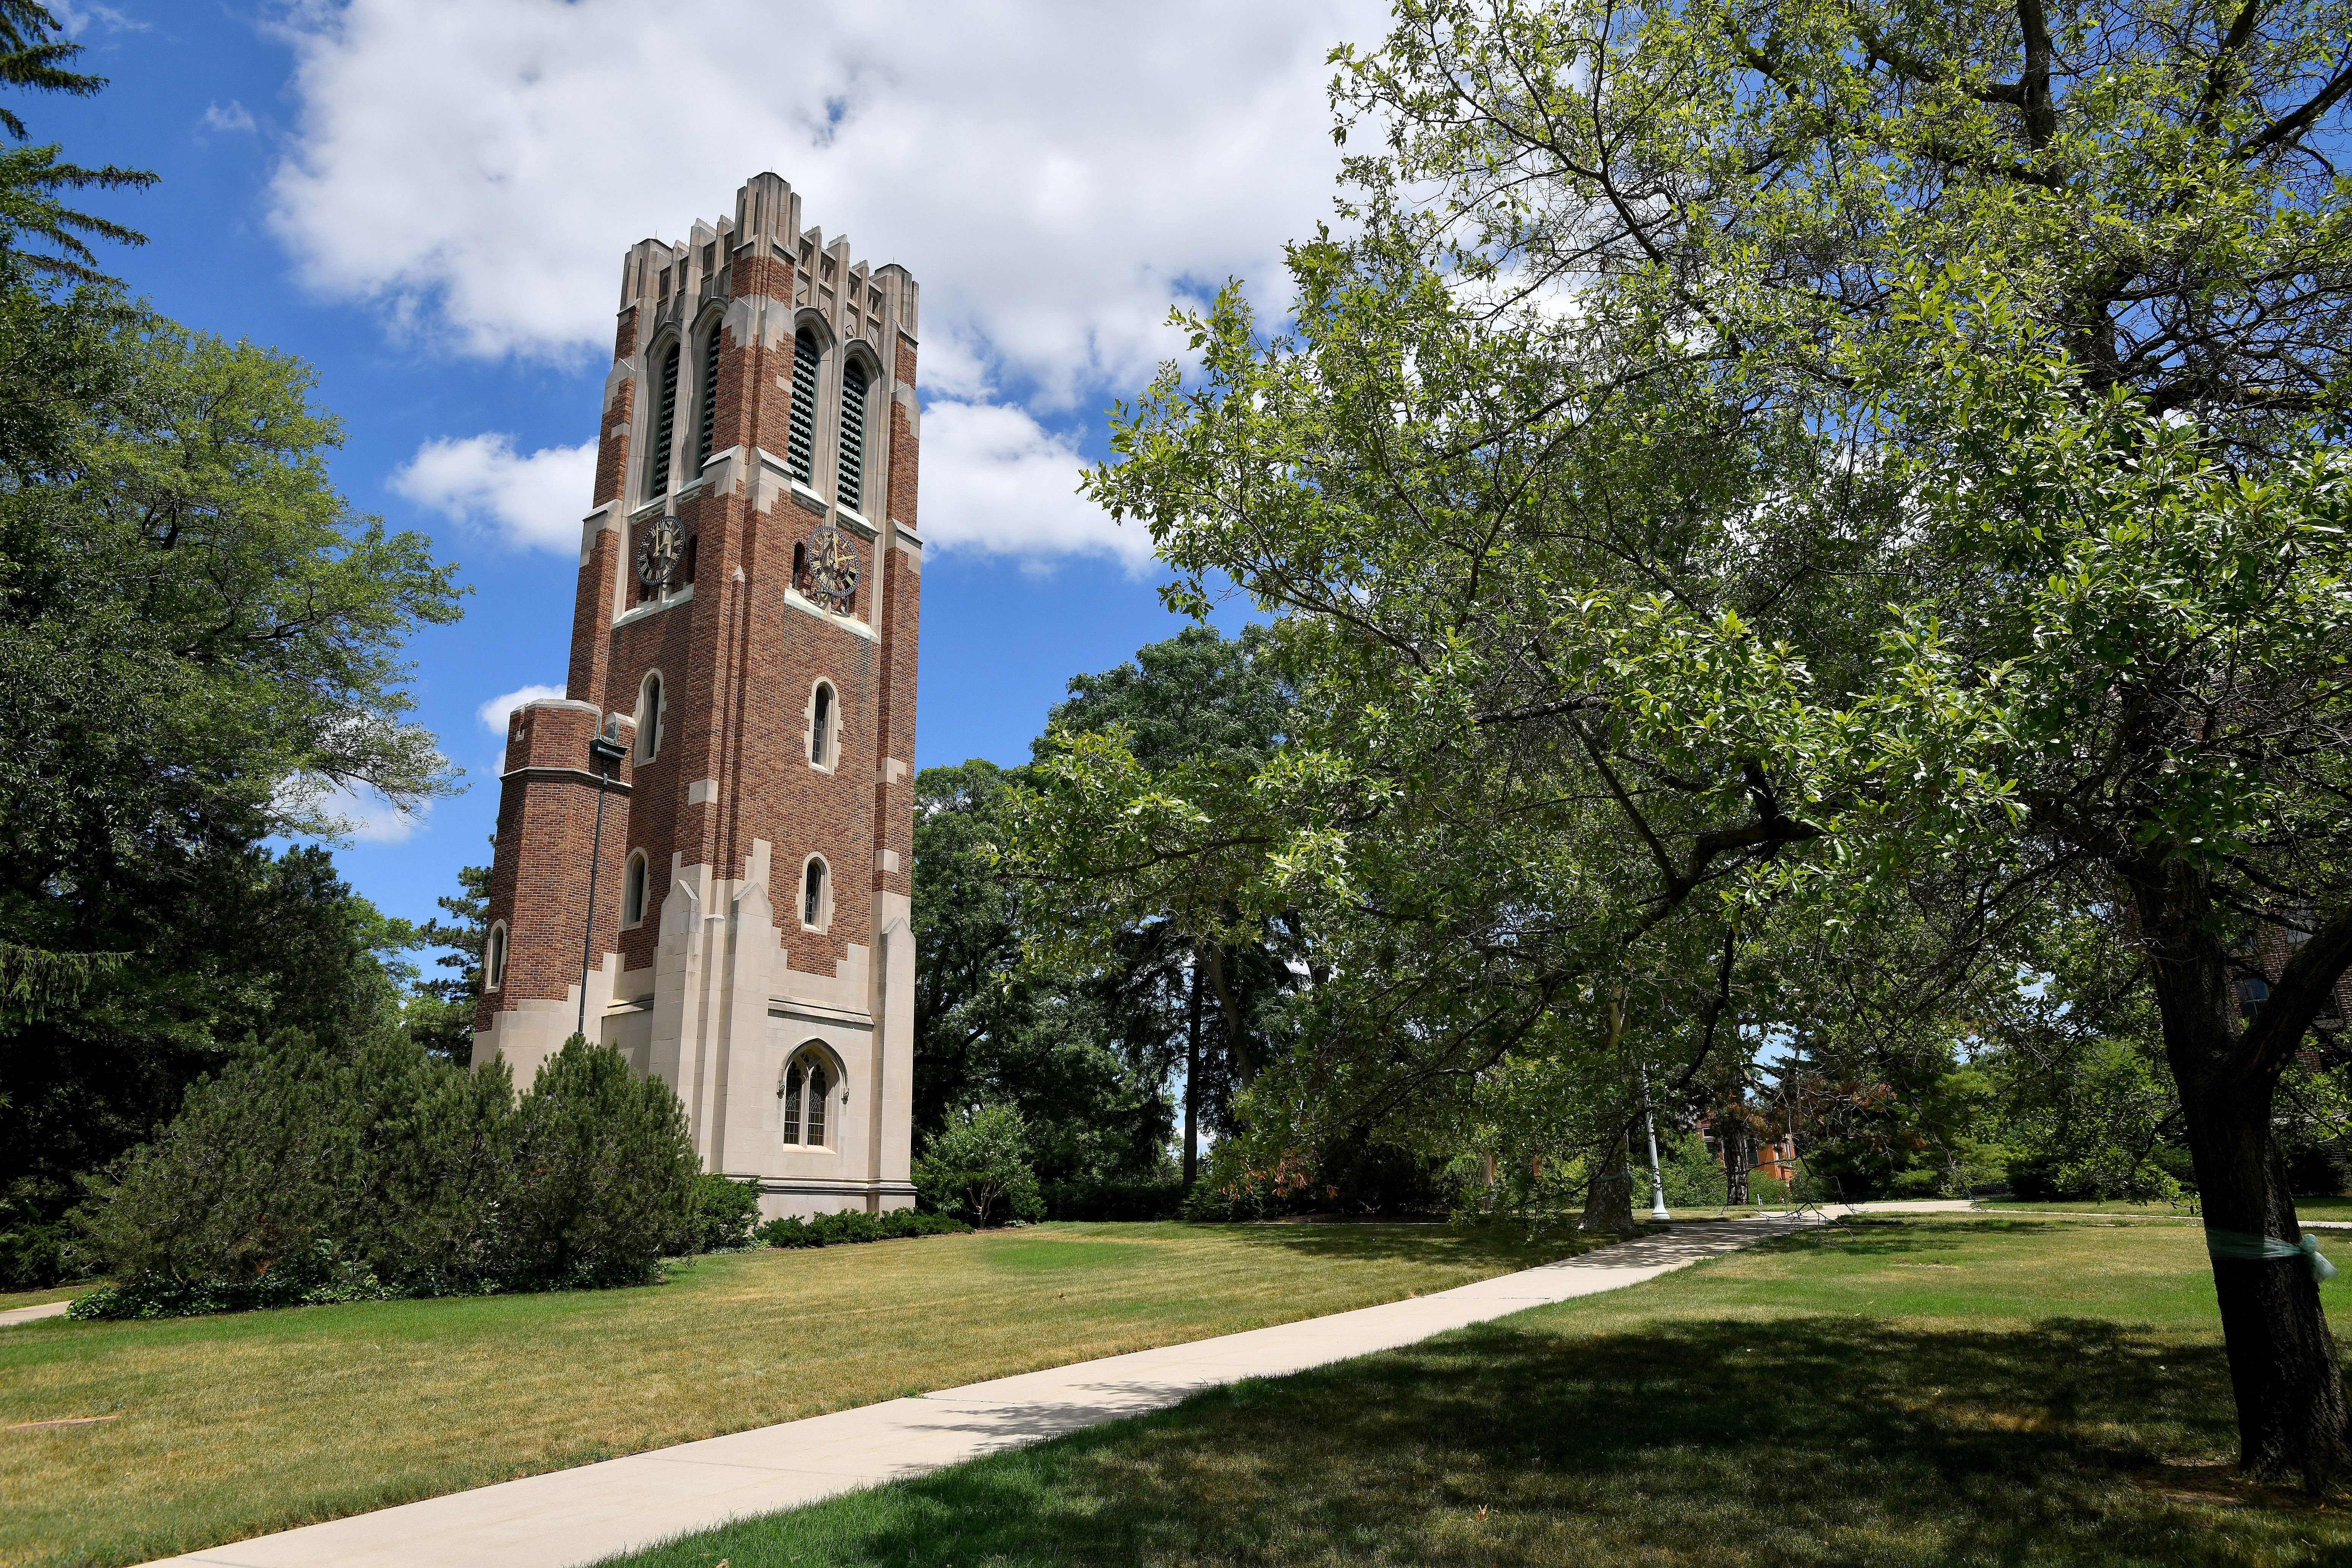 There is talk that Michigan State University  may  ban sexual relationships between all faculty and all undergraduates.